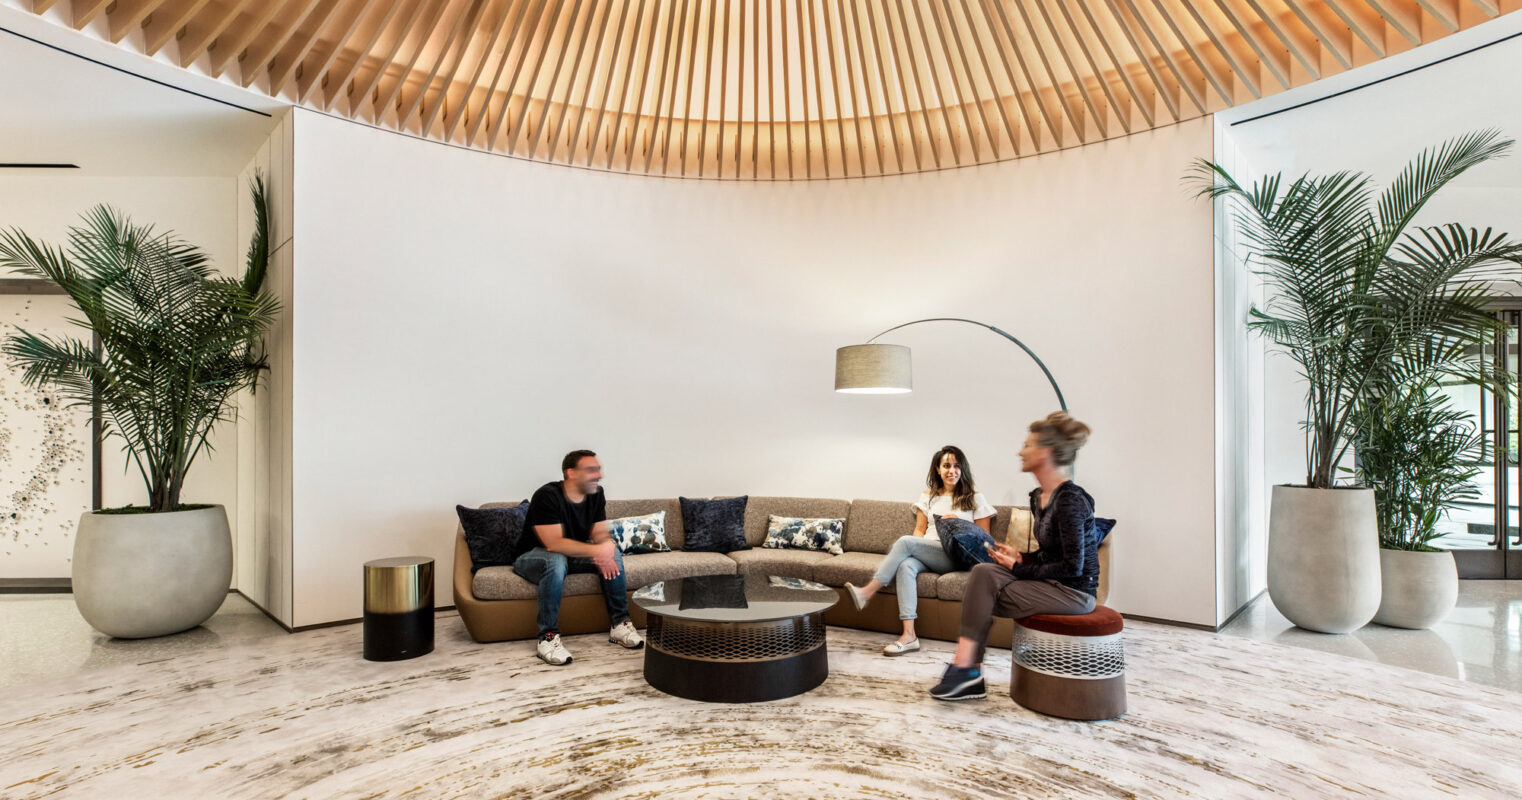 Spacious lounge area with a curved wood slat ceiling radiating from a central point, complemented by minimalist furnishings on a marble floor. Large potted plants add a natural touch to the modern, airy space.